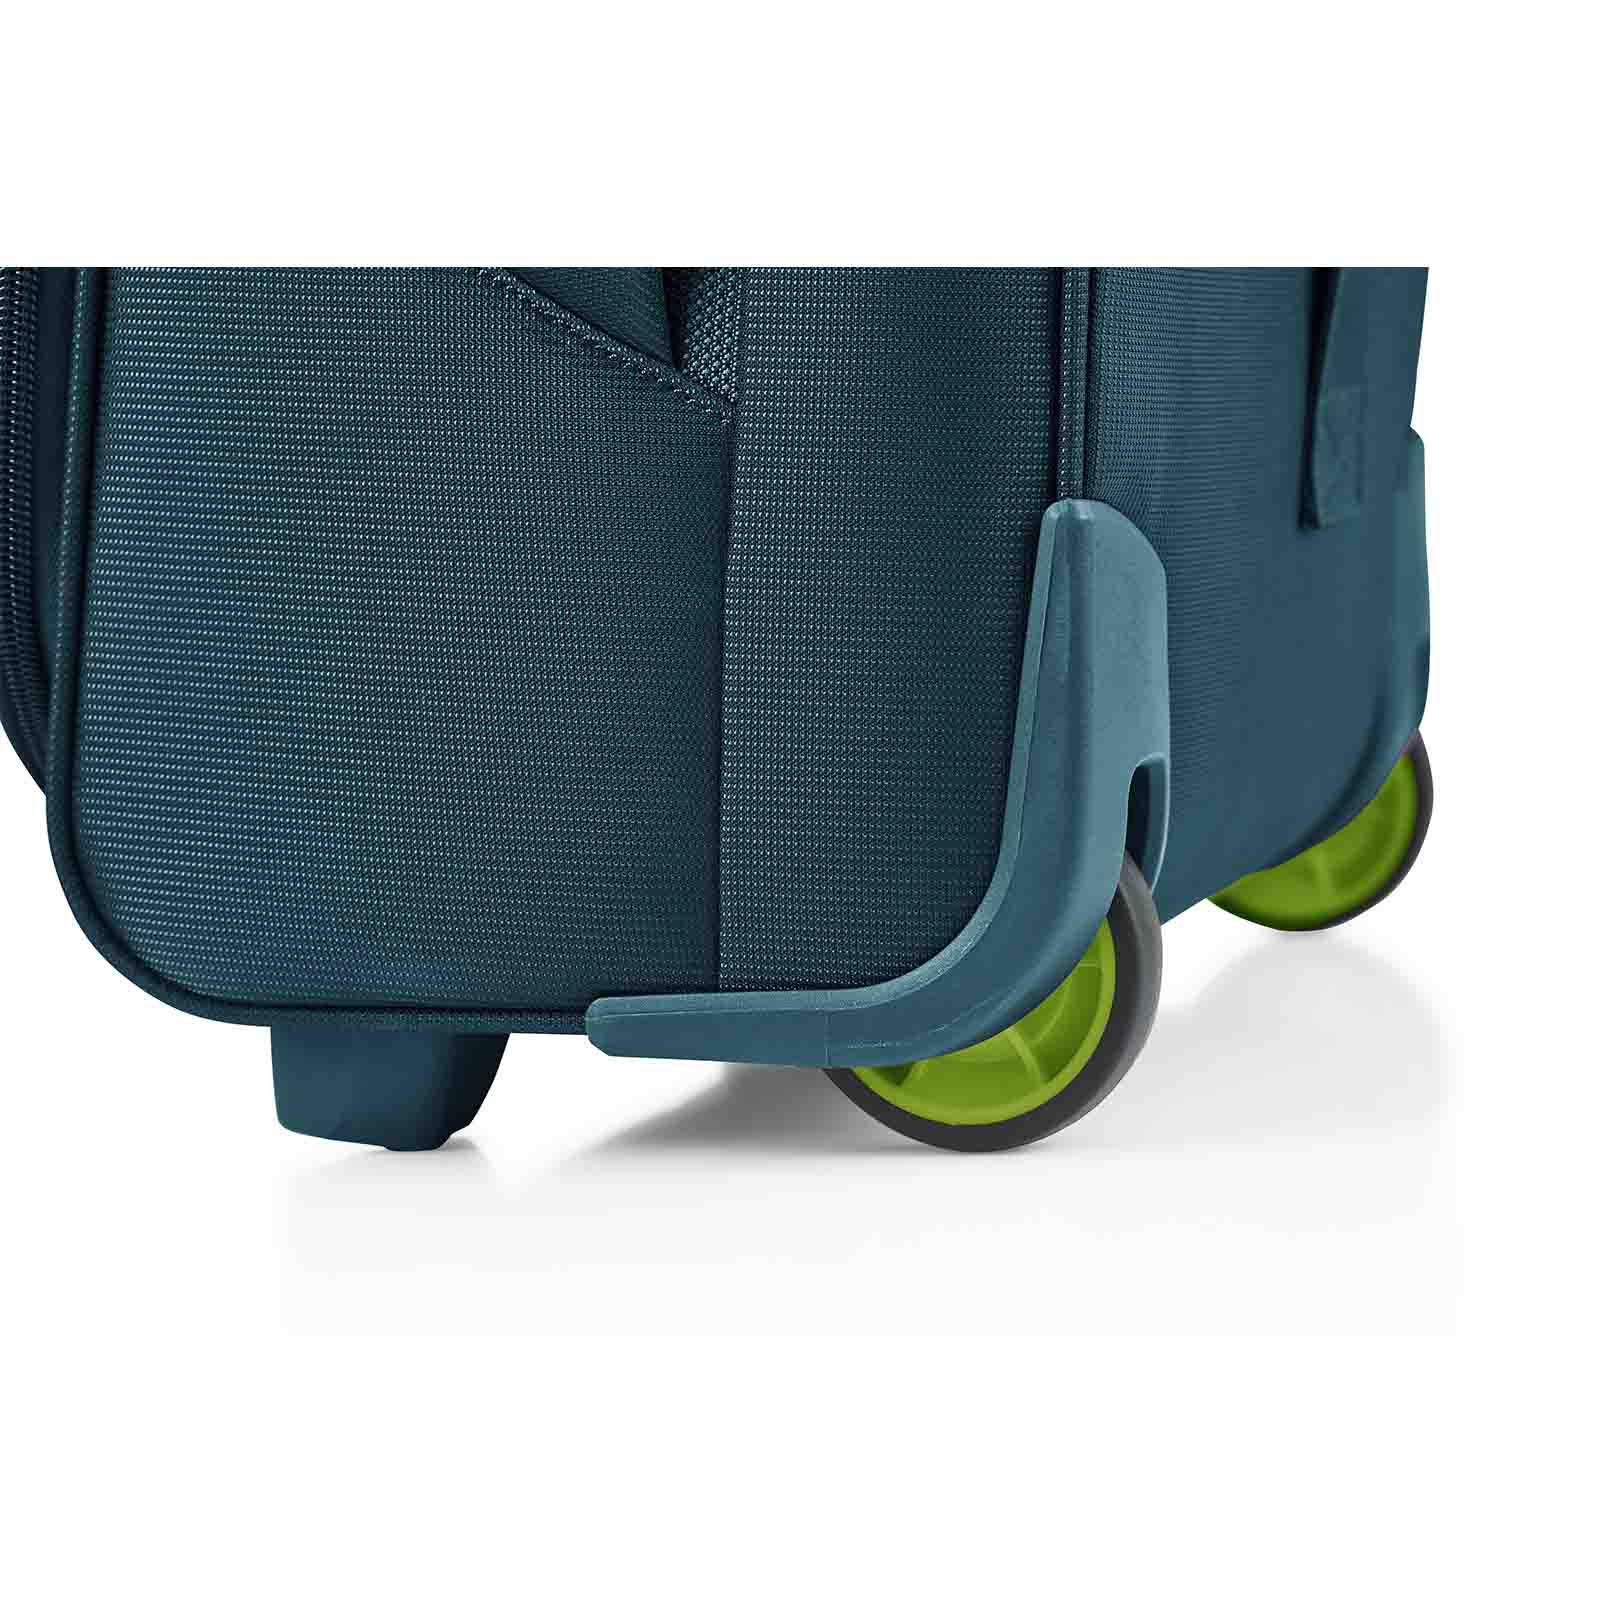 American-Tourister-Applite-4-Eco-50cm-Carry-On-Suitcase-Varsity-Green-Wheels